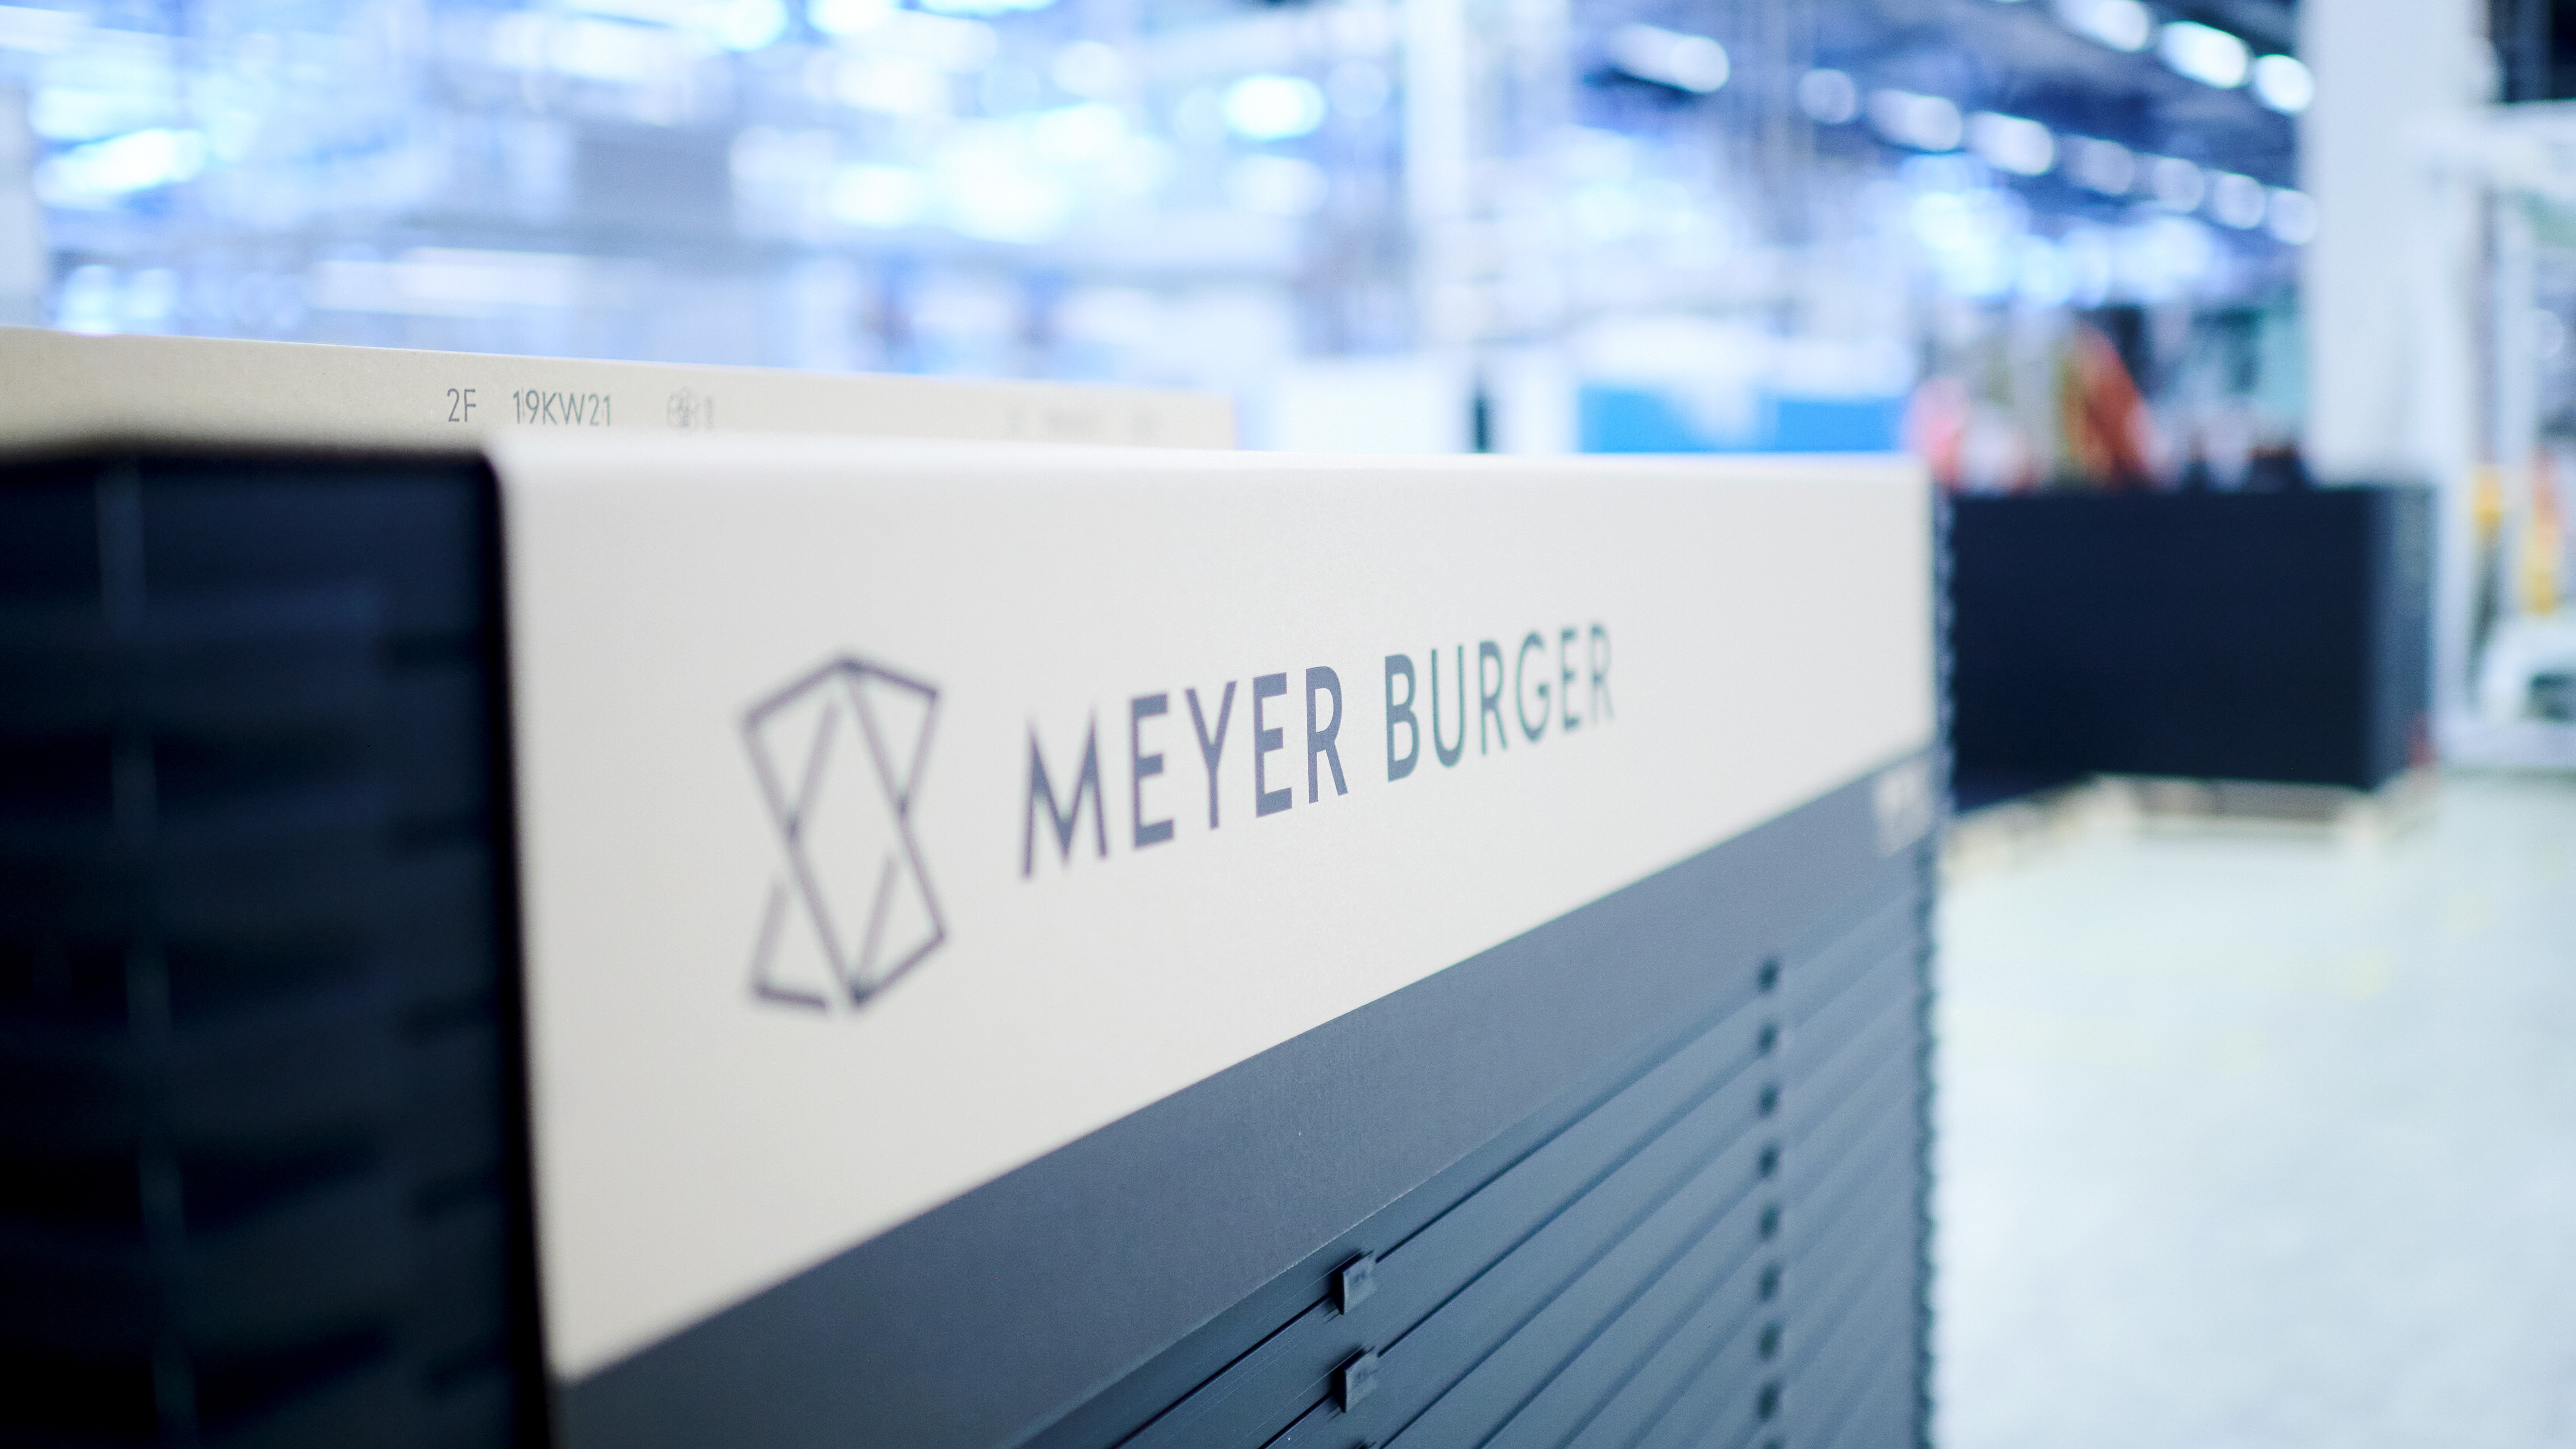 Stacks of high-performance modules from Meyer Burger